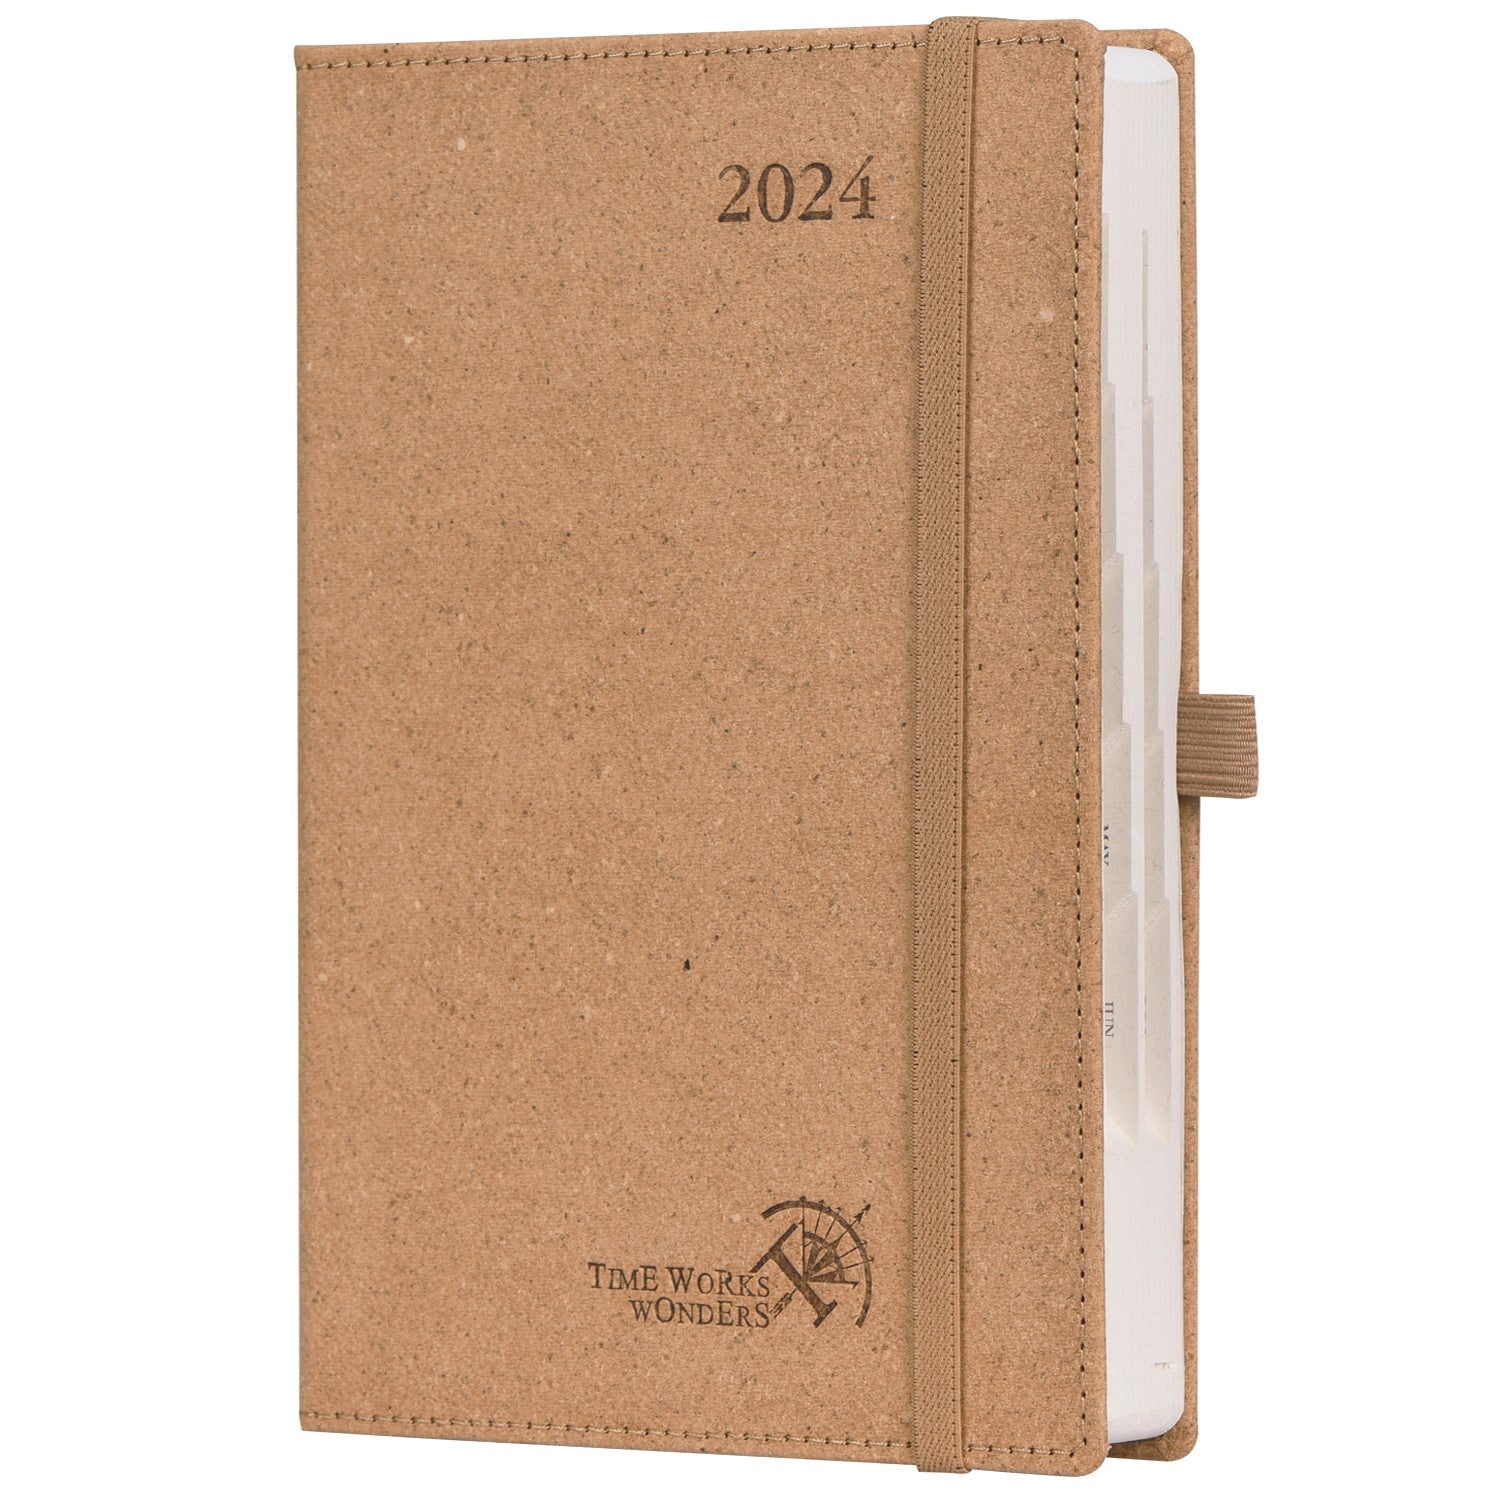 POPRUN Daily Planner 2024 One Page per Day with Vegan Leather Hardcover -  Agenda 2024 Hourly Appointment Book with Monthly Tabs, Inner Pocket, 5.5 x